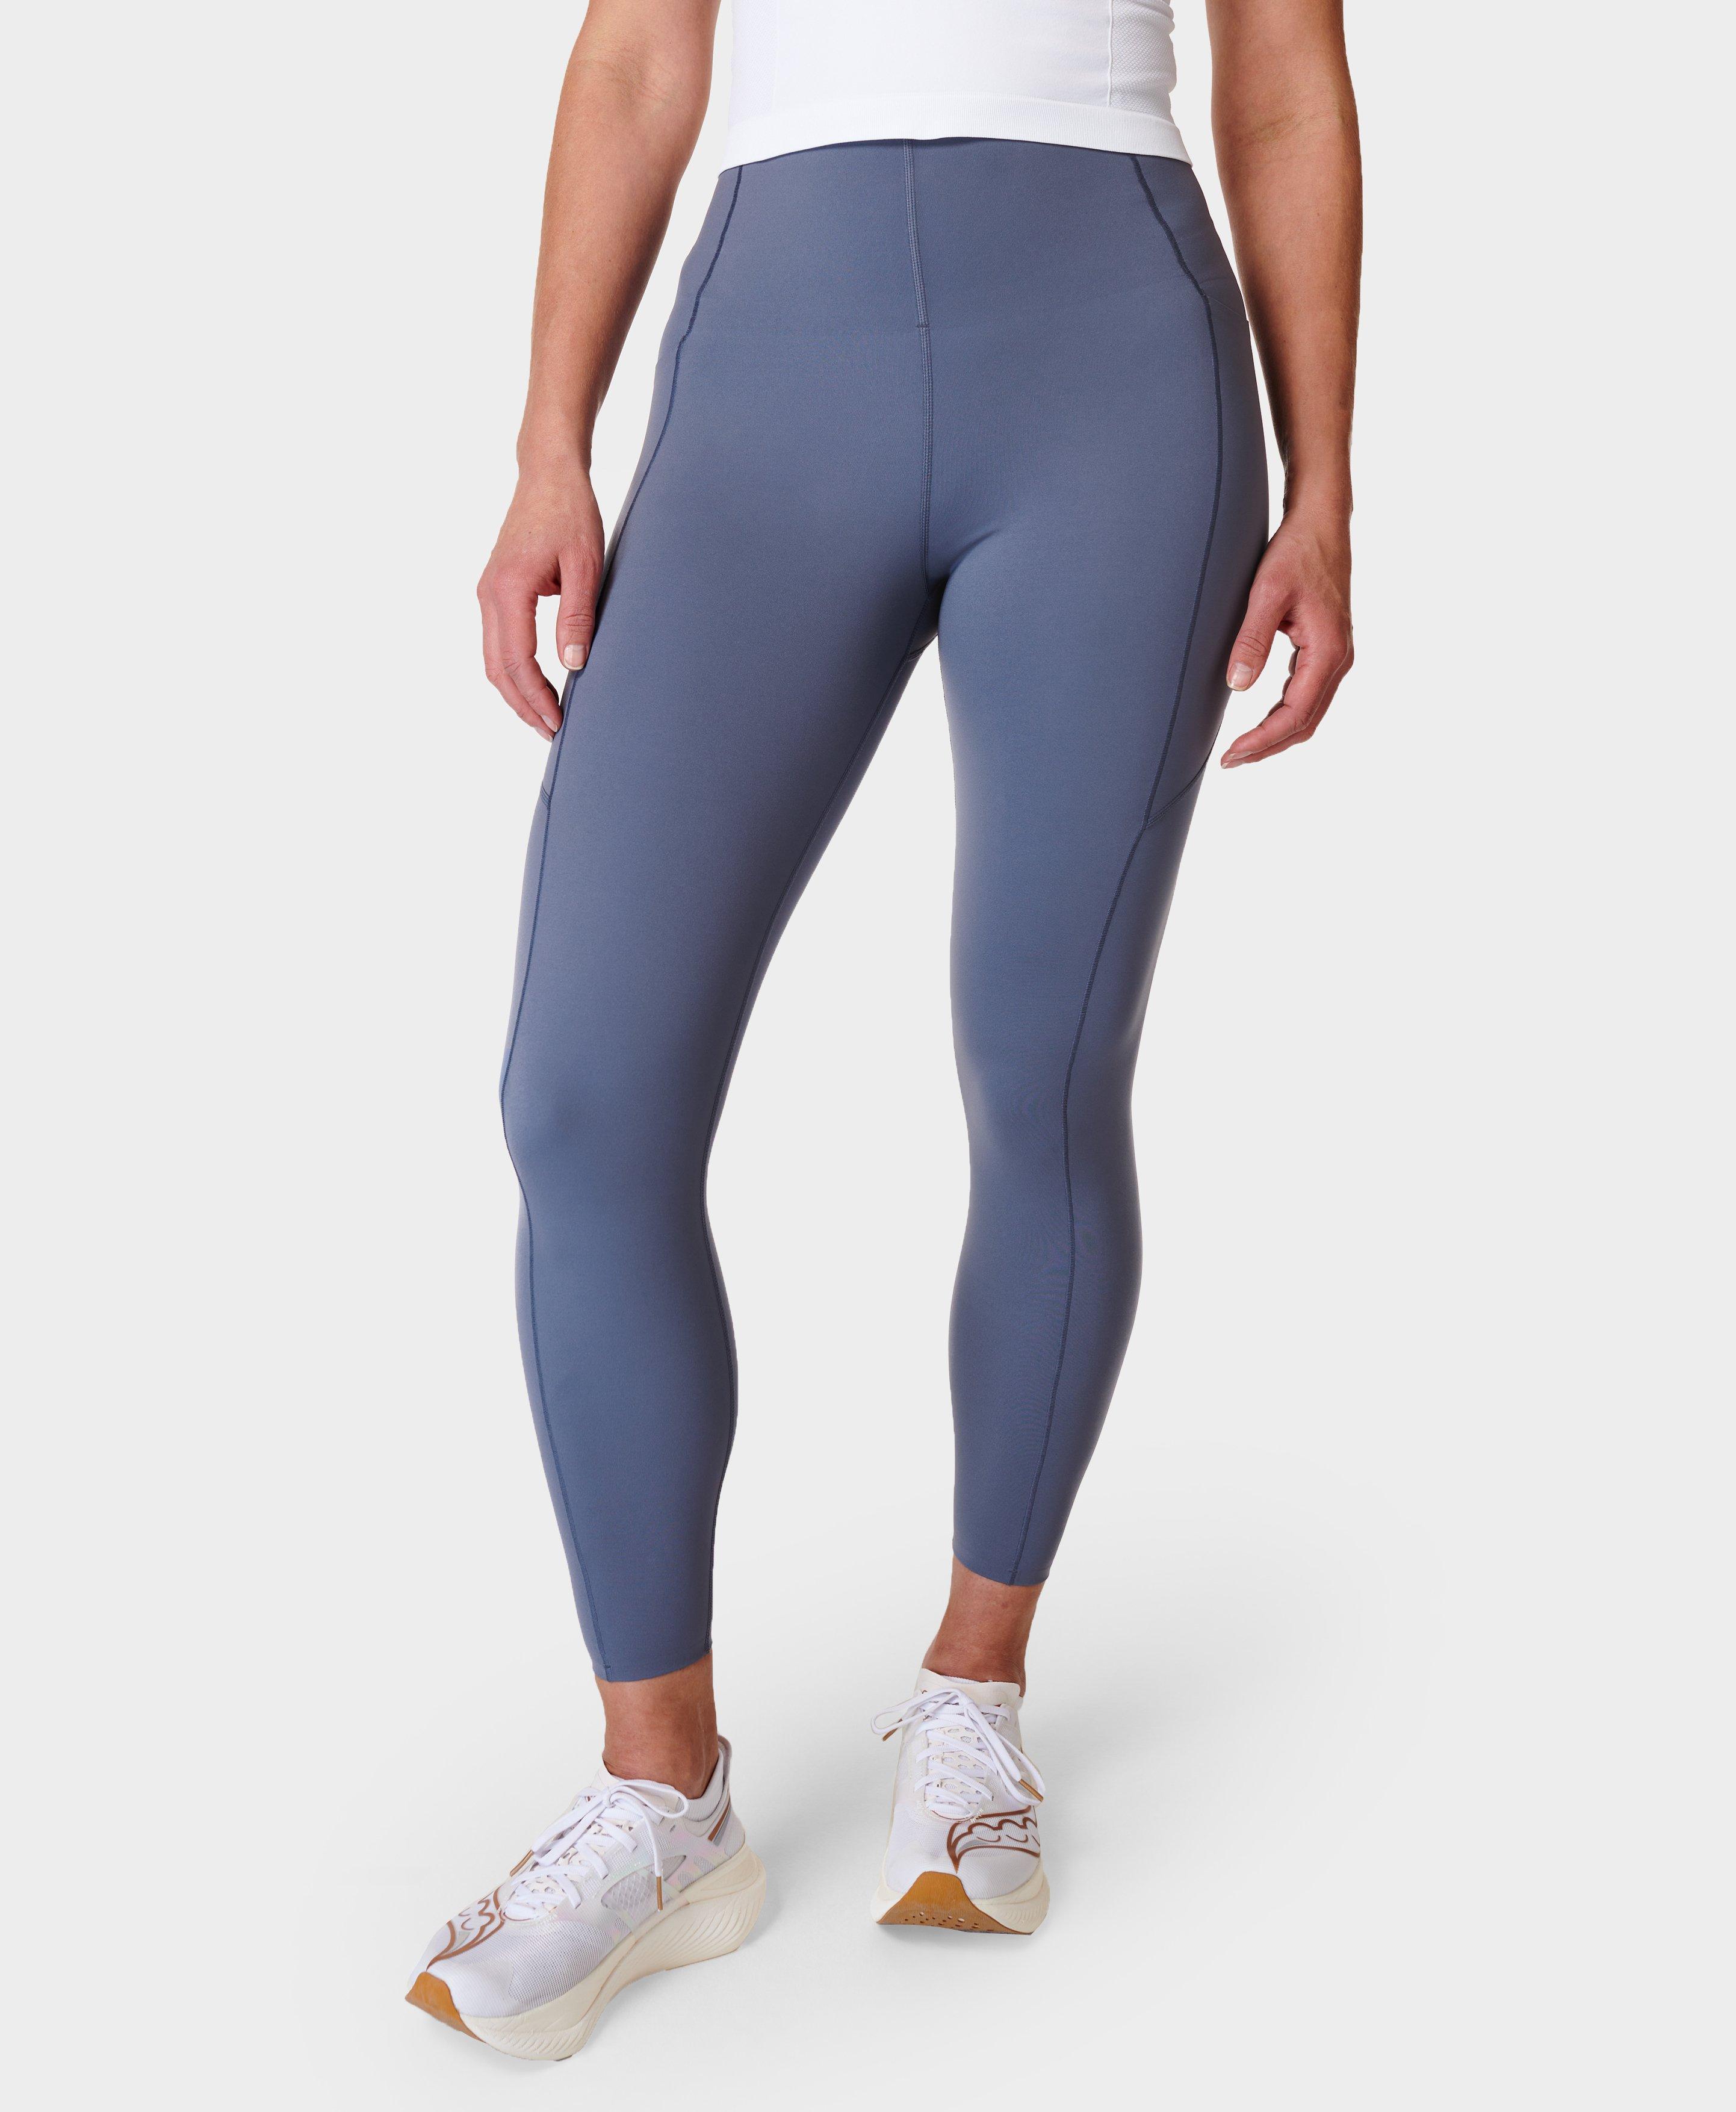 Sweaty Betty NEW All Day 7/8 Crop Length Rouche Hem Athletic Leggings Black  XL - $56 - From Galore